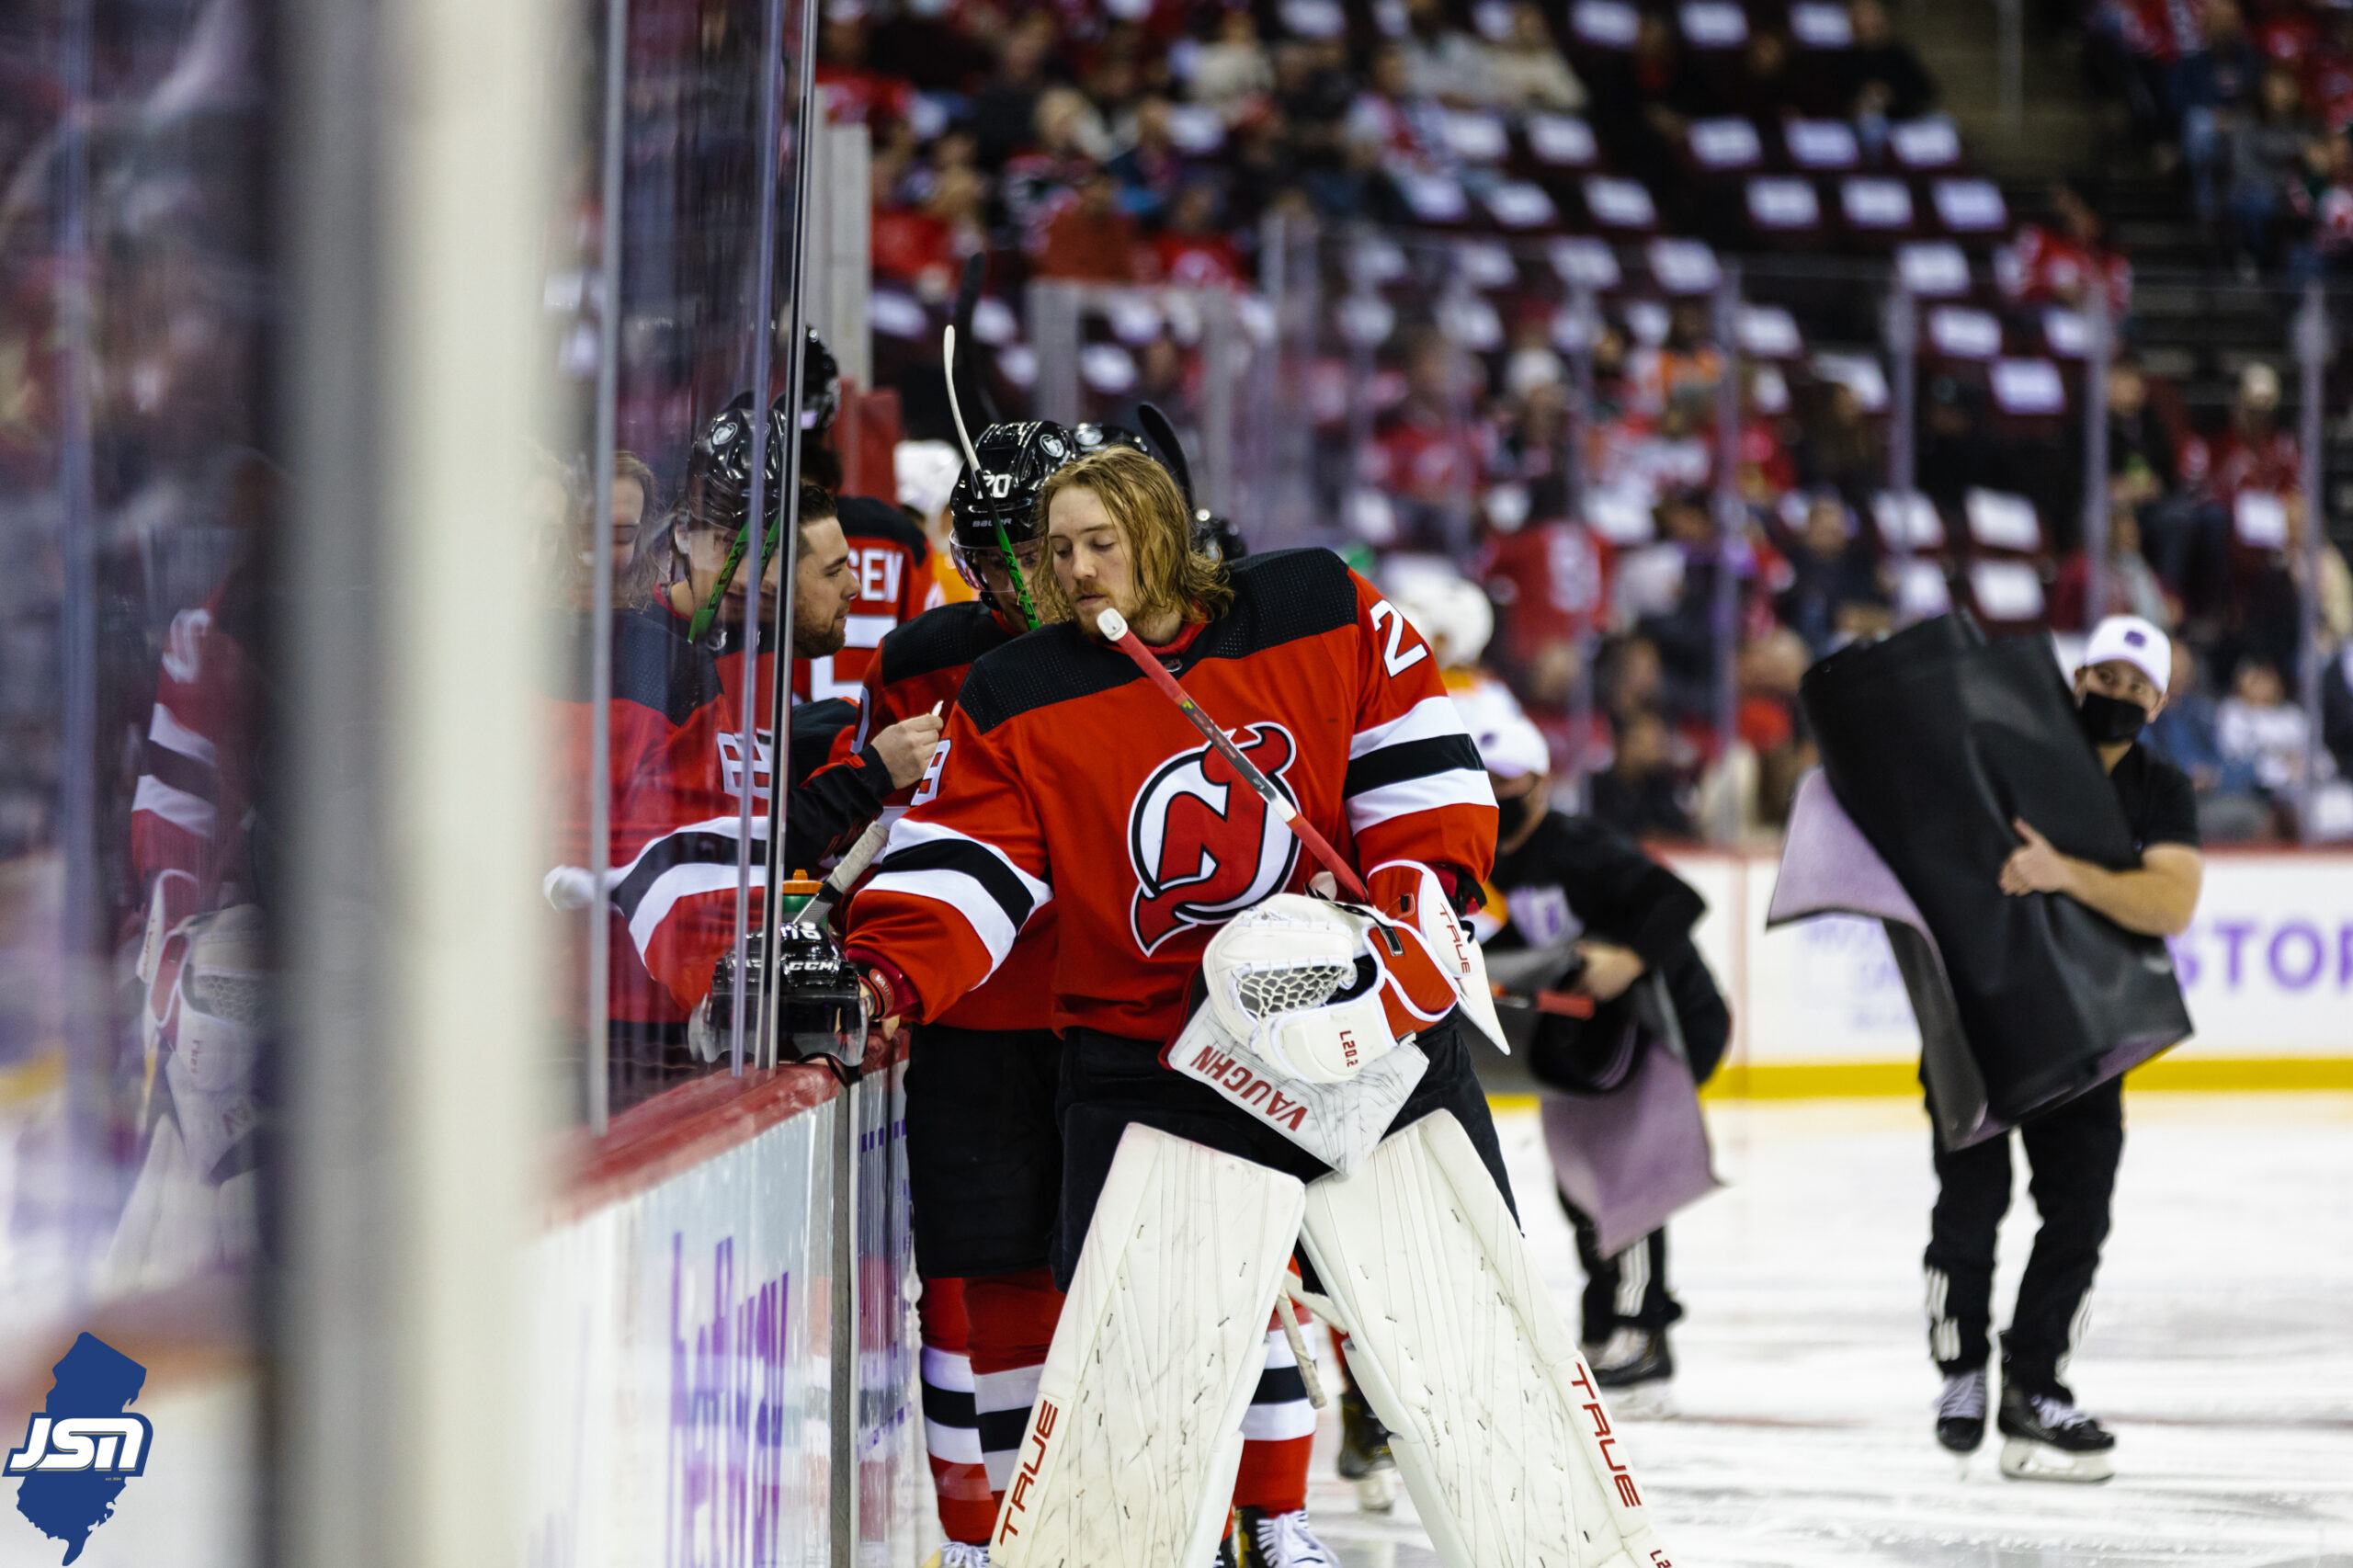 Video: A look inside the Devil inside the Prudential Center 